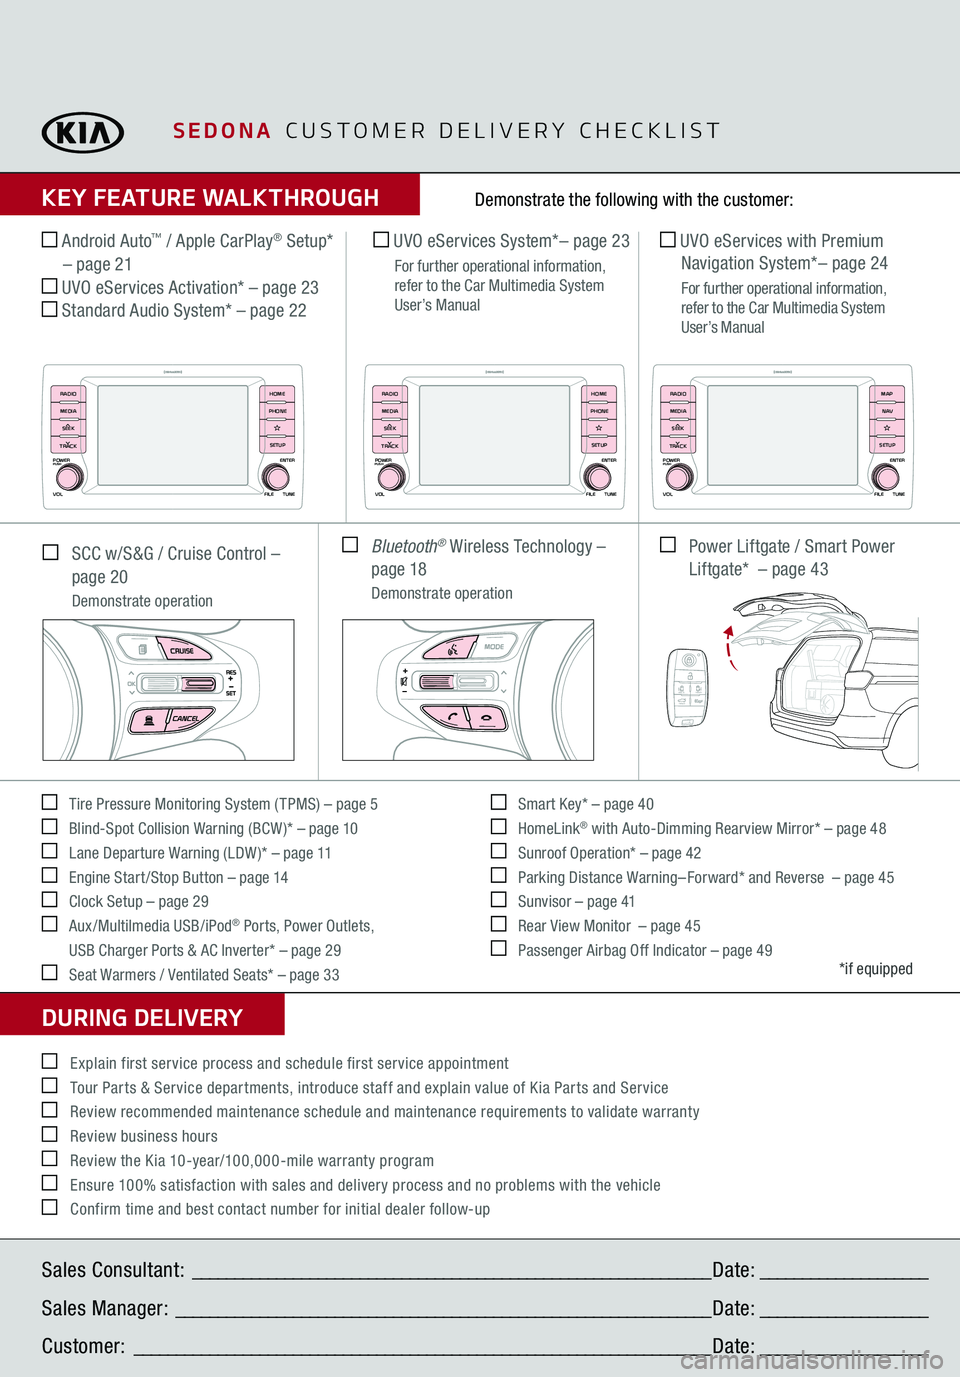 KIA SEDONA 2020  Features and Functions Guide SEDONA
  CUSTOMER DELIVERY CHECKLIST
KEY FEATURE WALKTHROUGHDURING DELIVERY    Tire Pressure Monitoring System ( TPMS) – page 5   Blind-Spot Collision Warning (BCW )* – page 10   Lane Departure Wa